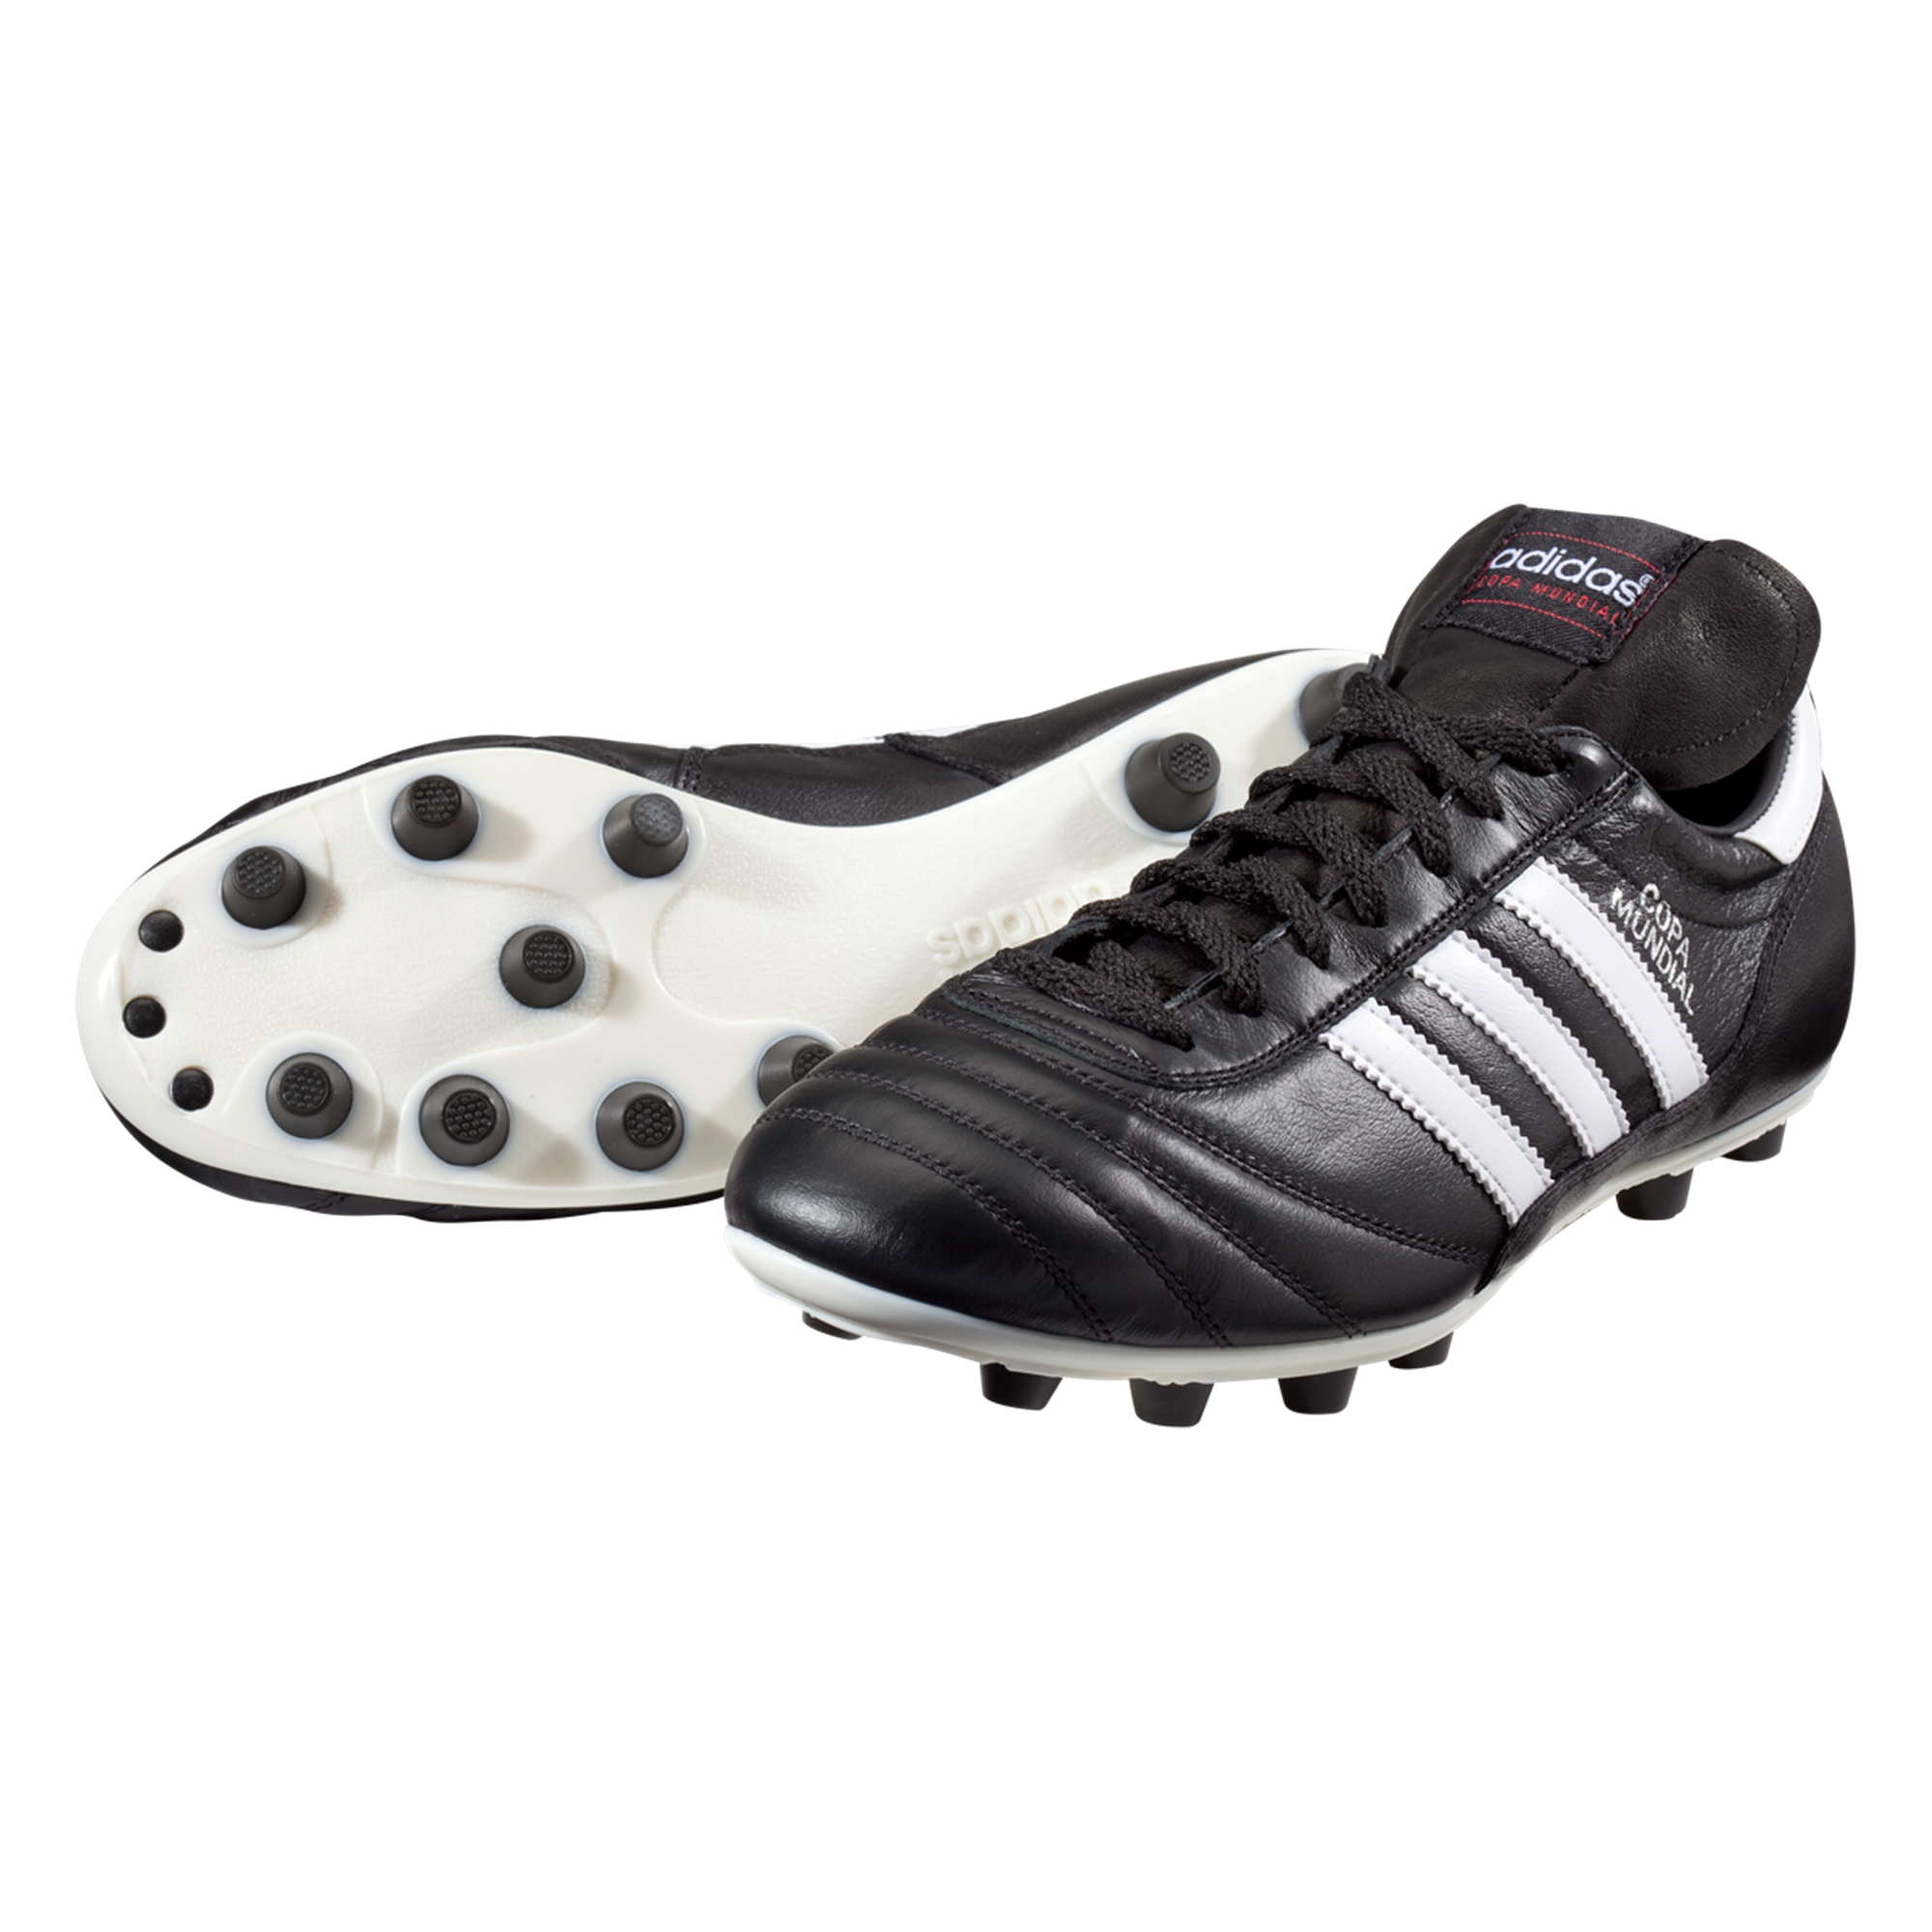 The best soccer cleats of all time | by 